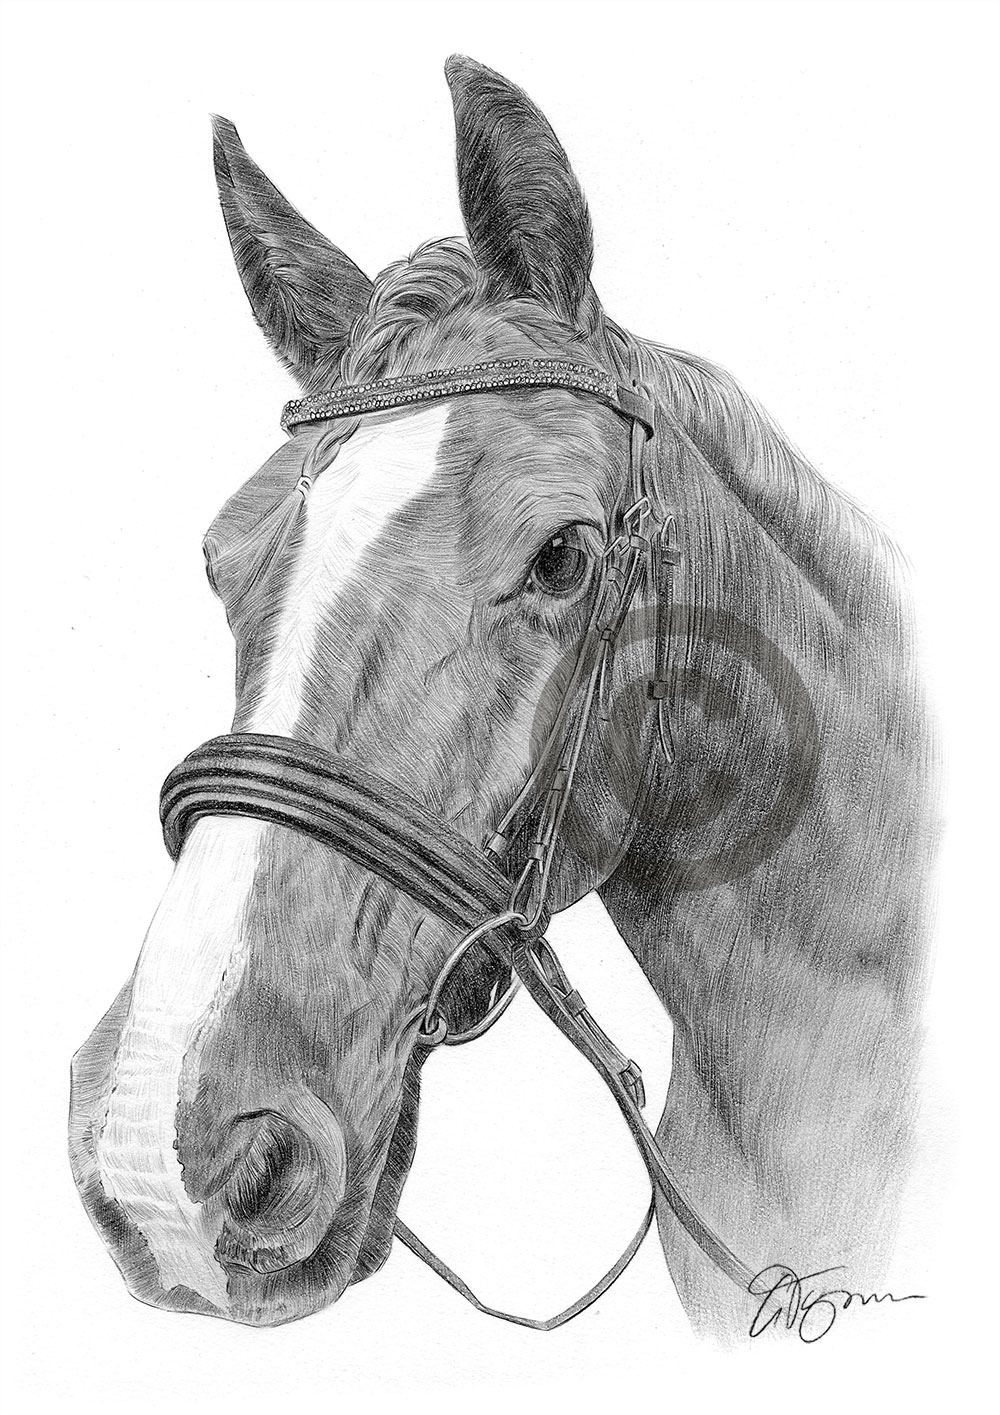 Pencil drawing of a stallion horse by artist Gary Tymon